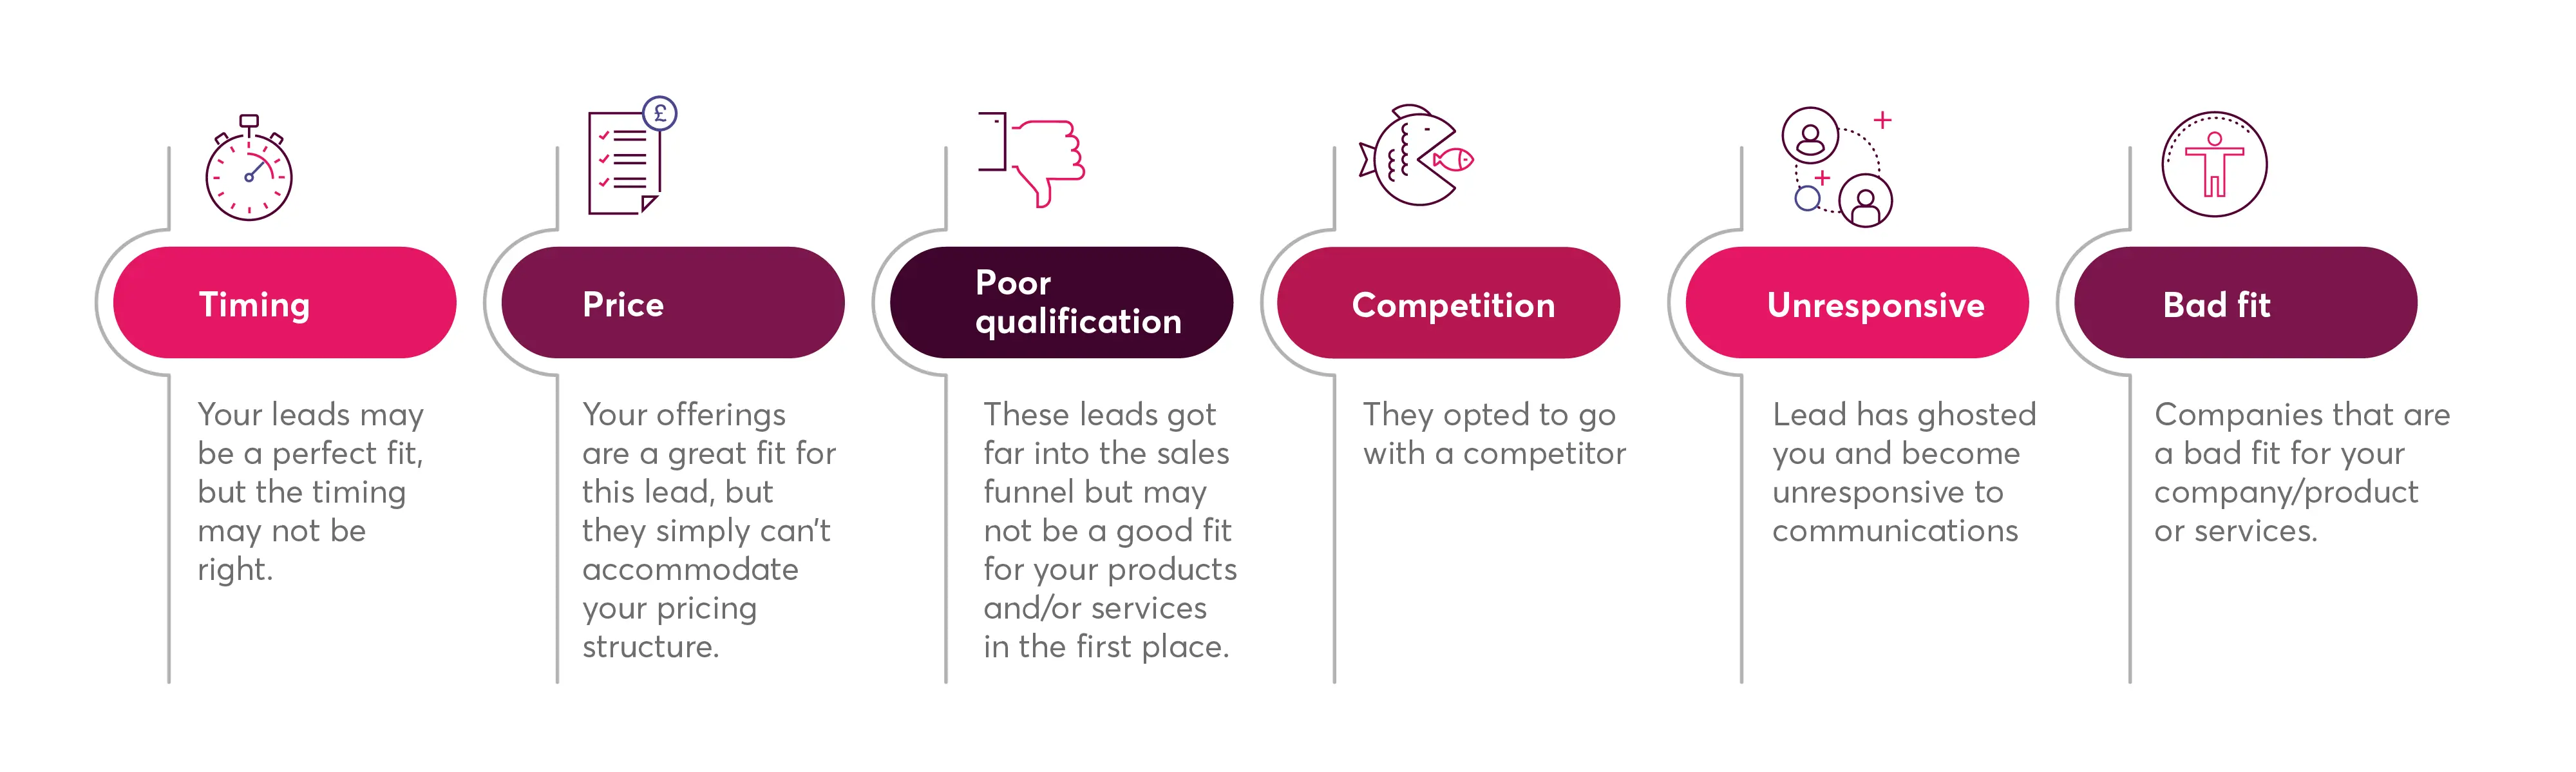  Infographic showing six common challenges in lead nurturing